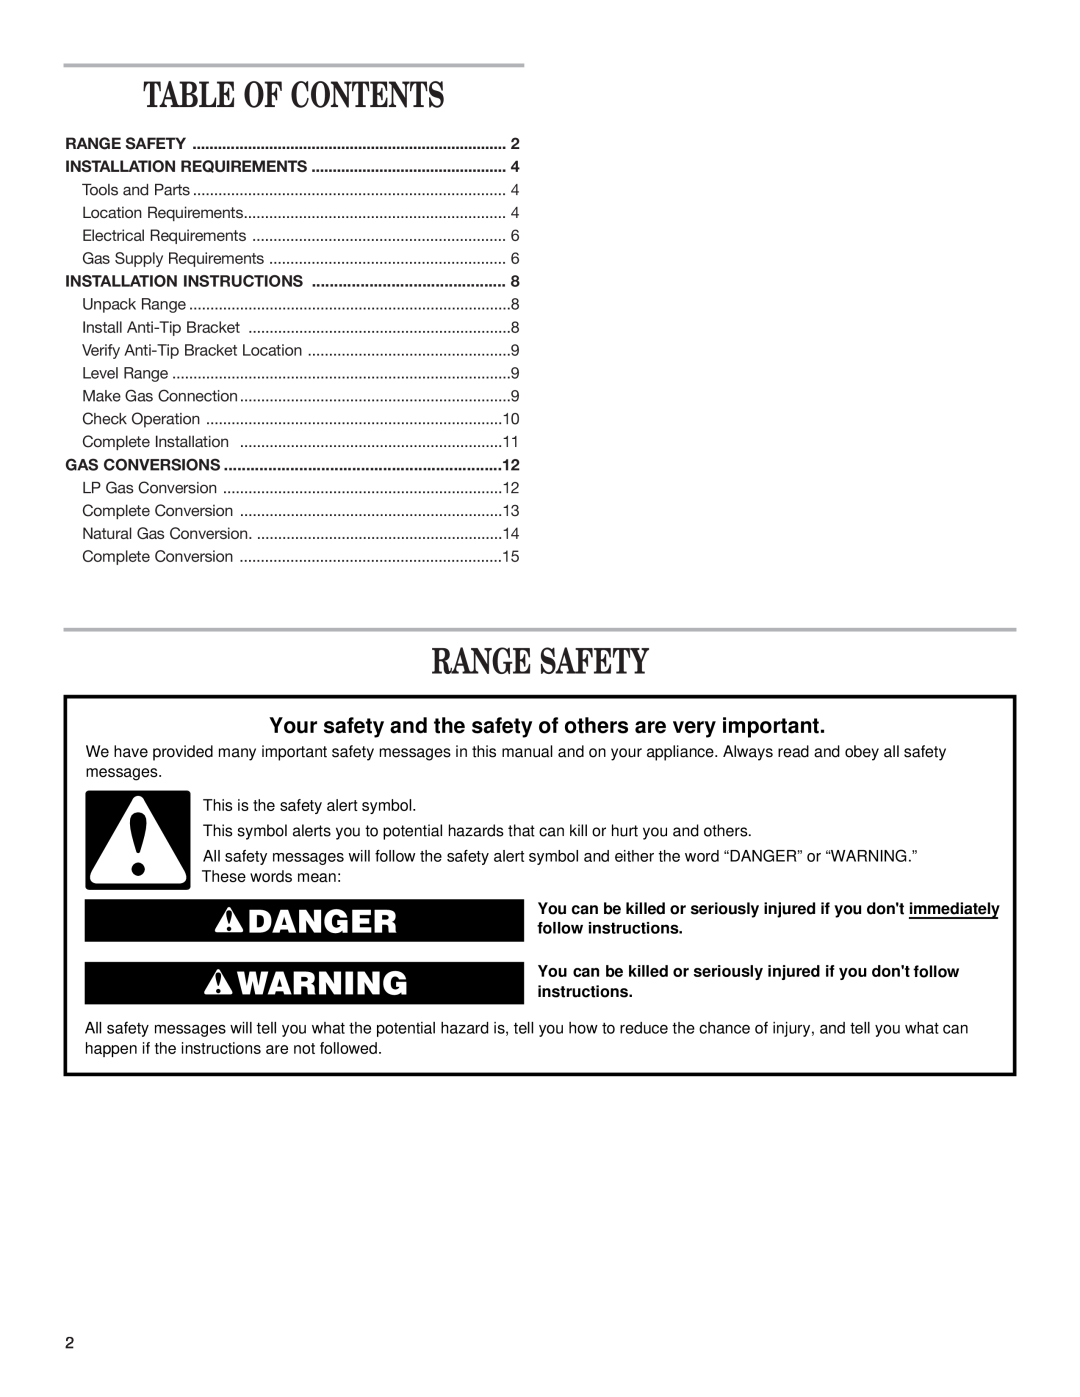 Whirlpool W10130752A Range Safety, Table Of Contents, Danger, Installation Requirements, Installation Instructions 